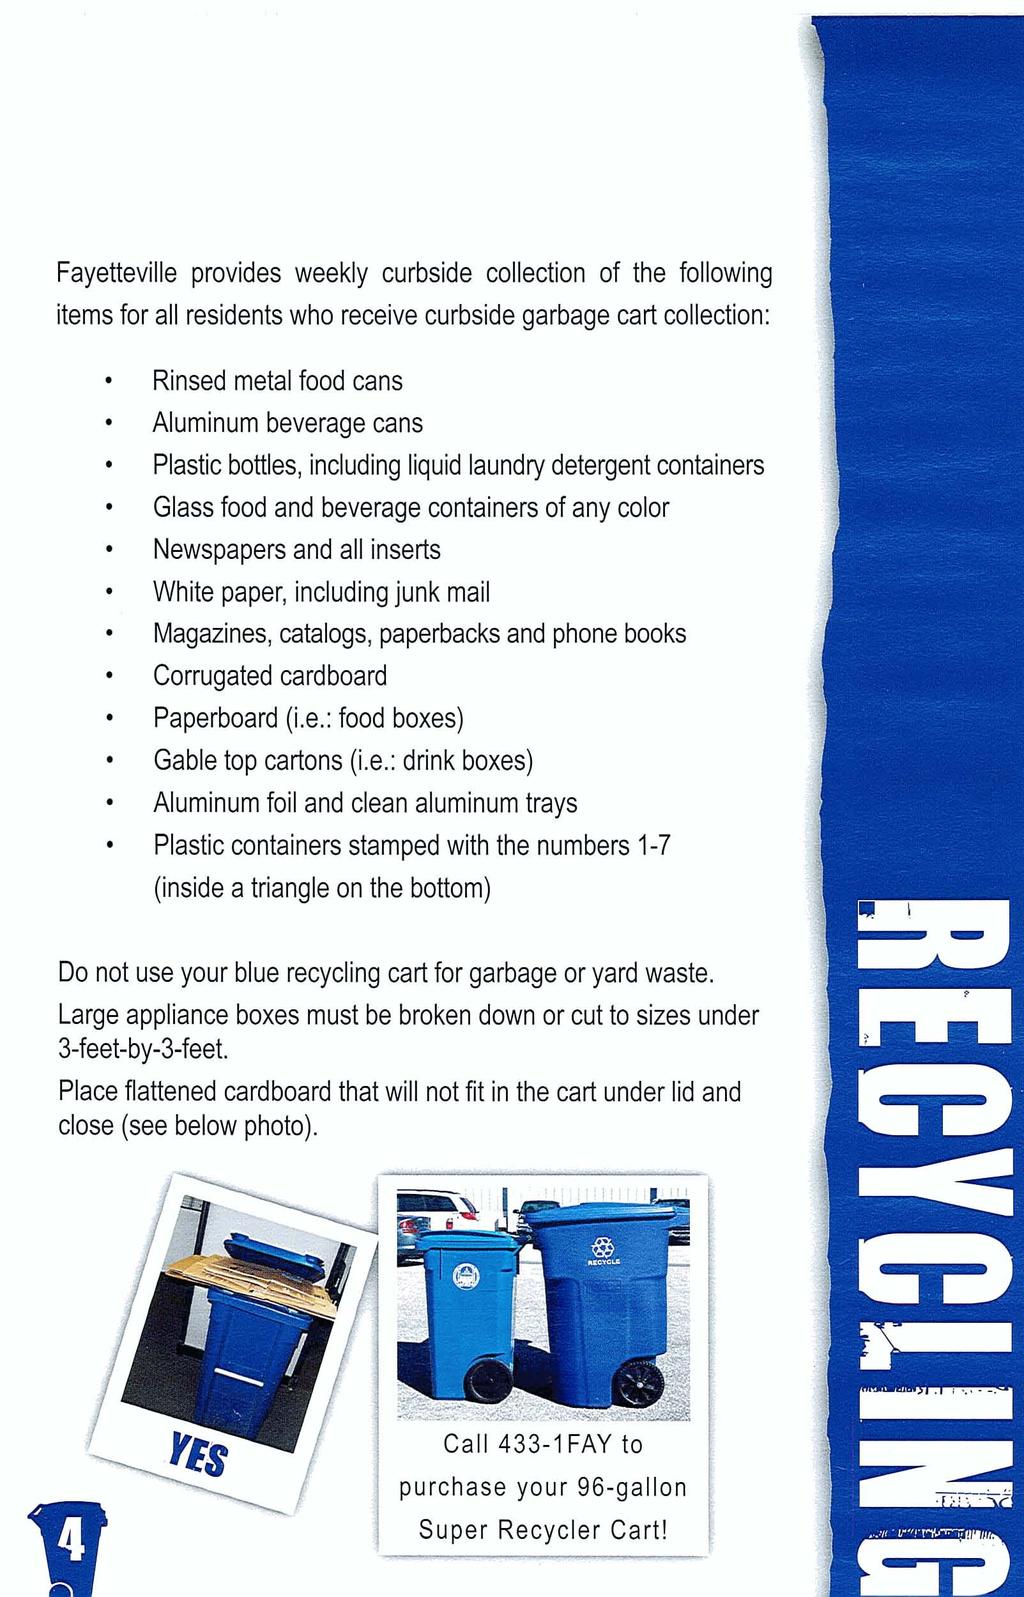 Fayetteville provides weekly curbside collection of the following items for all residents who receive curbside garbage cart collection: 1 I i Rinsed metal food cans Aluminum beverage cans Plastic